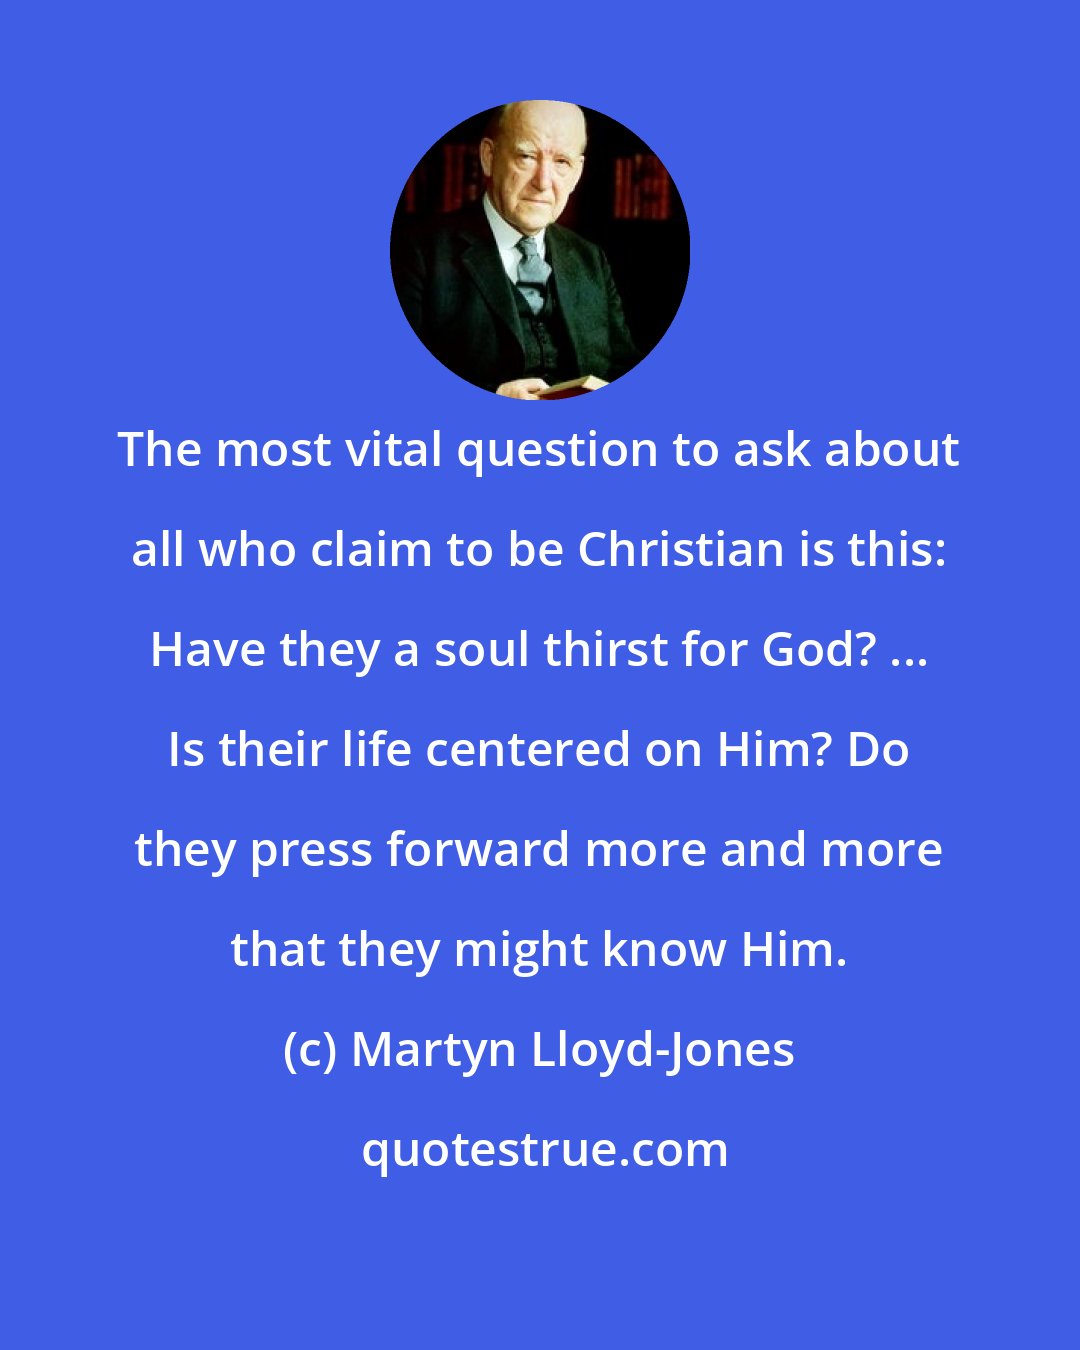 Martyn Lloyd-Jones: The most vital question to ask about all who claim to be Christian is this: Have they a soul thirst for God? ... Is their life centered on Him? Do they press forward more and more that they might know Him.